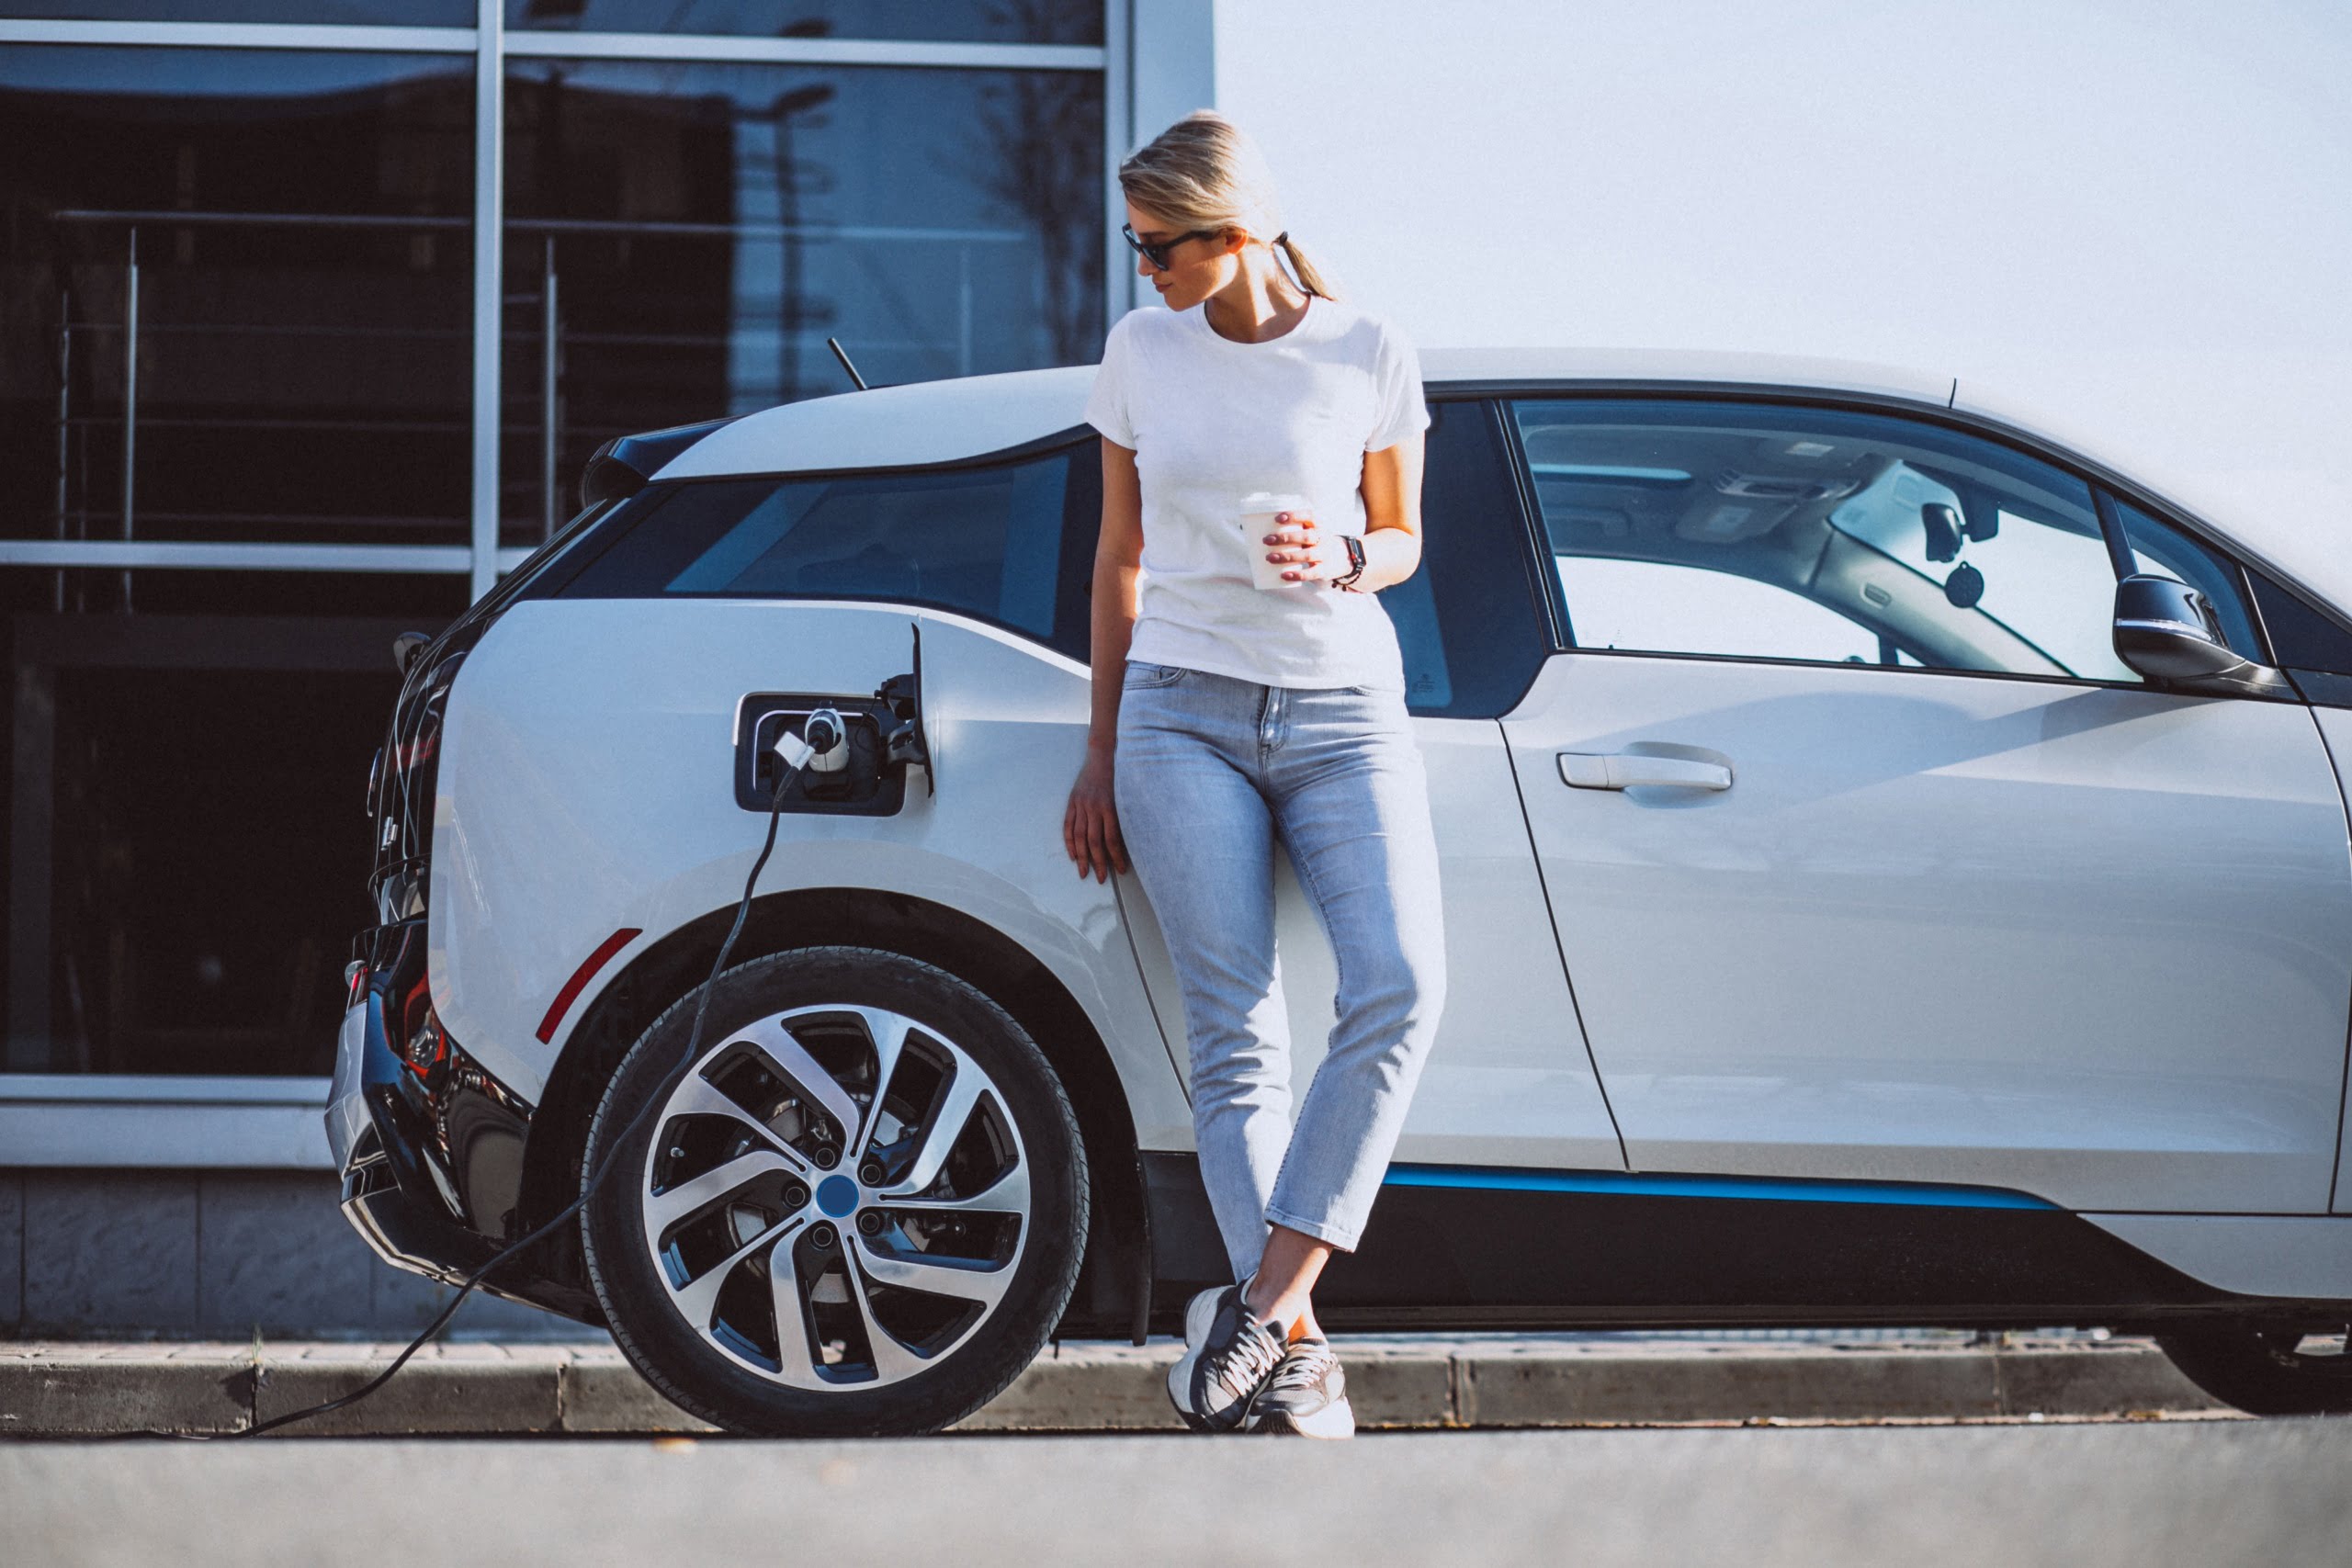 EV Connect provides innovative vehicle-charging solutions